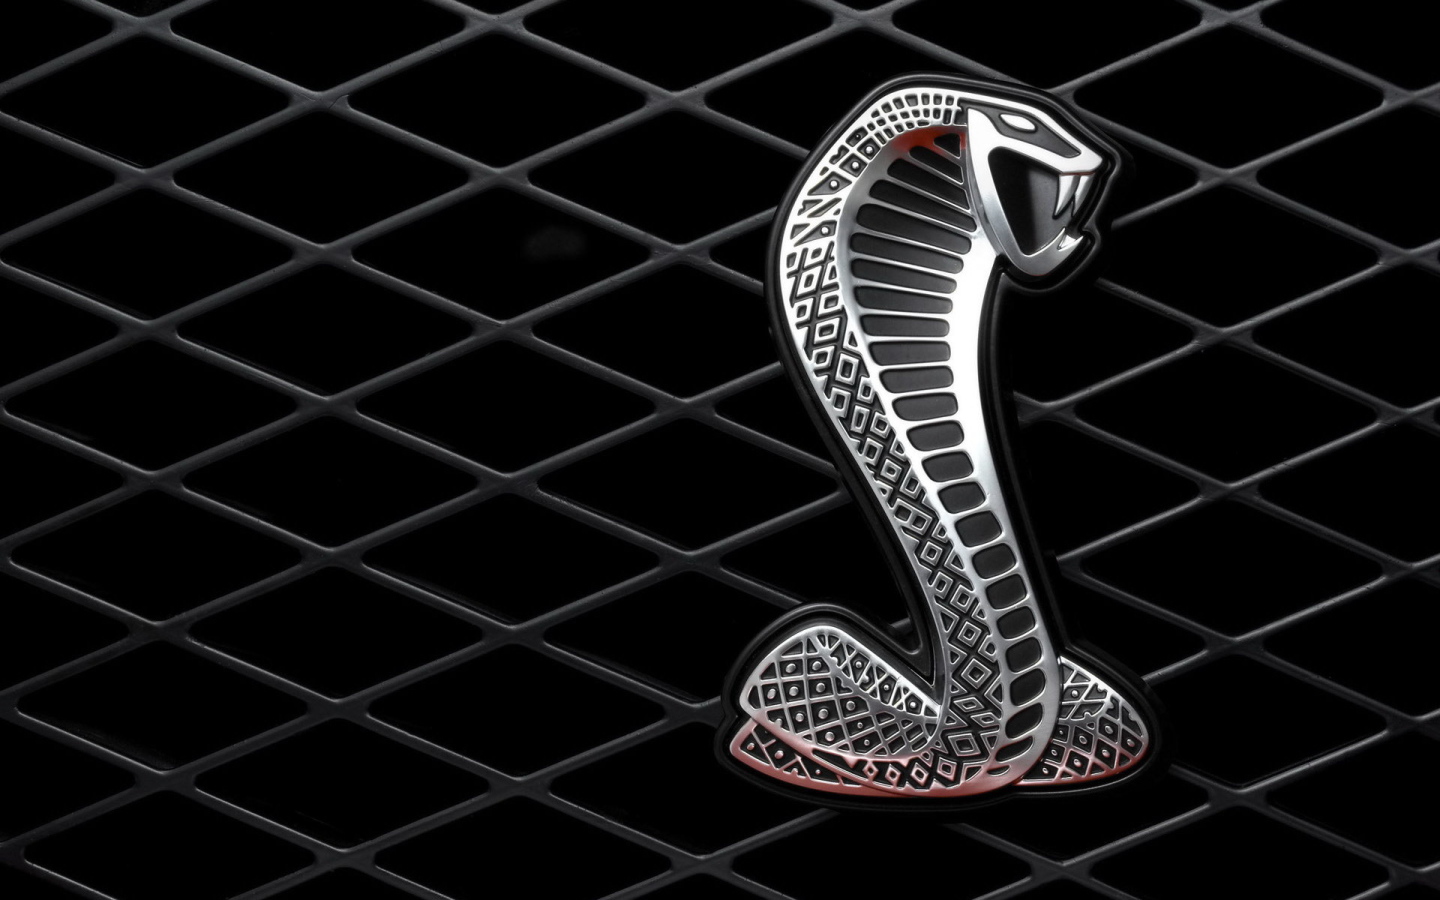 Cobra on the grille of the car